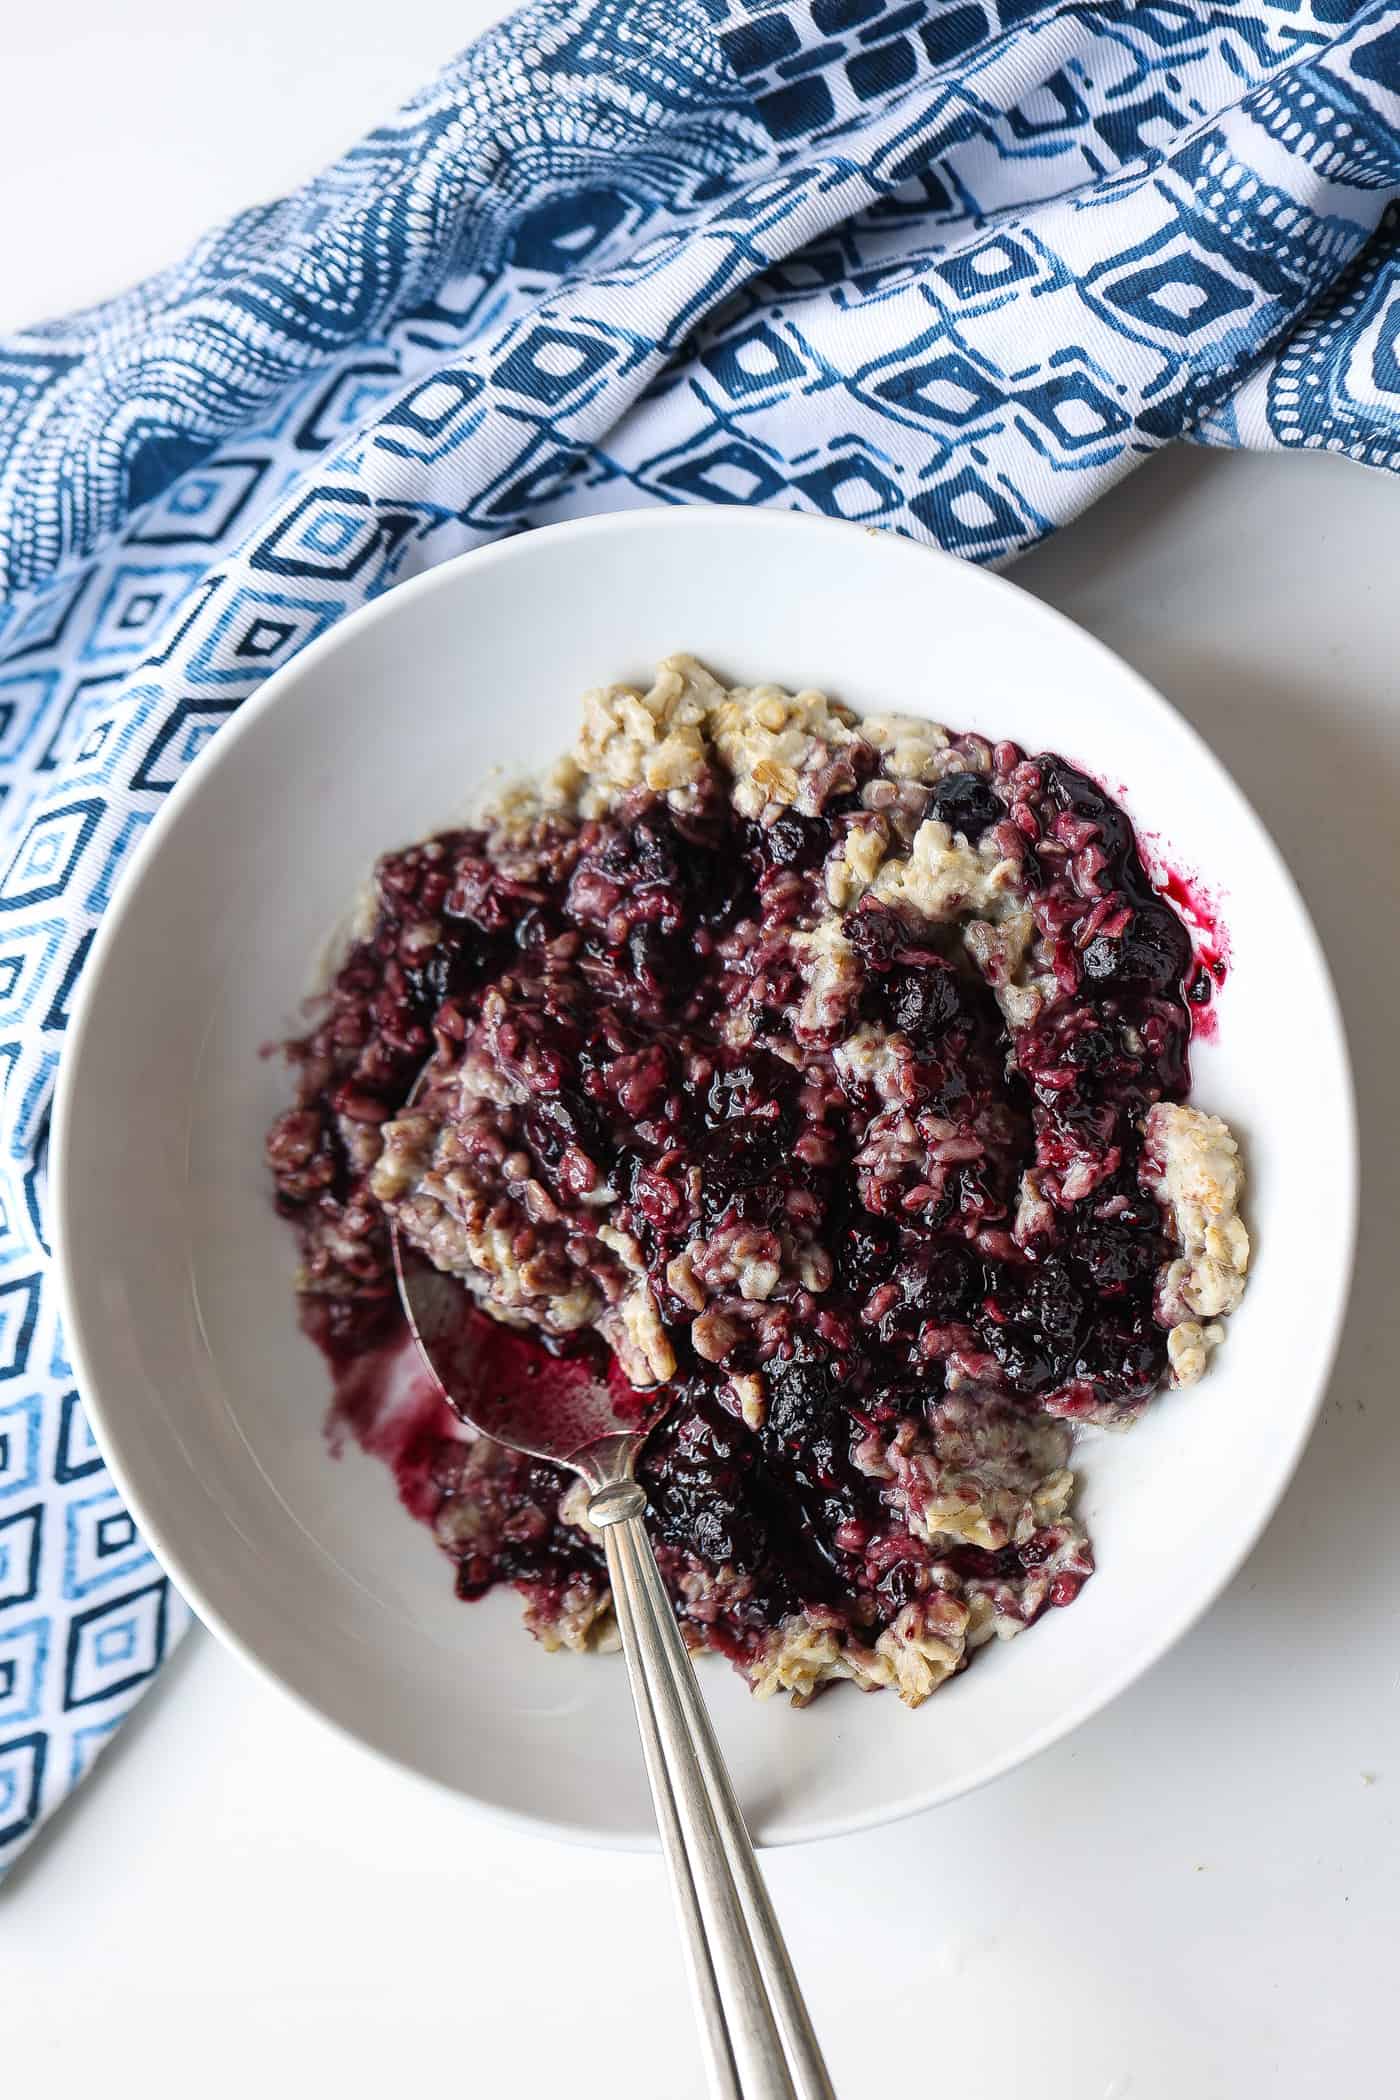 bowl of oatmeal topped with blueberry sauce